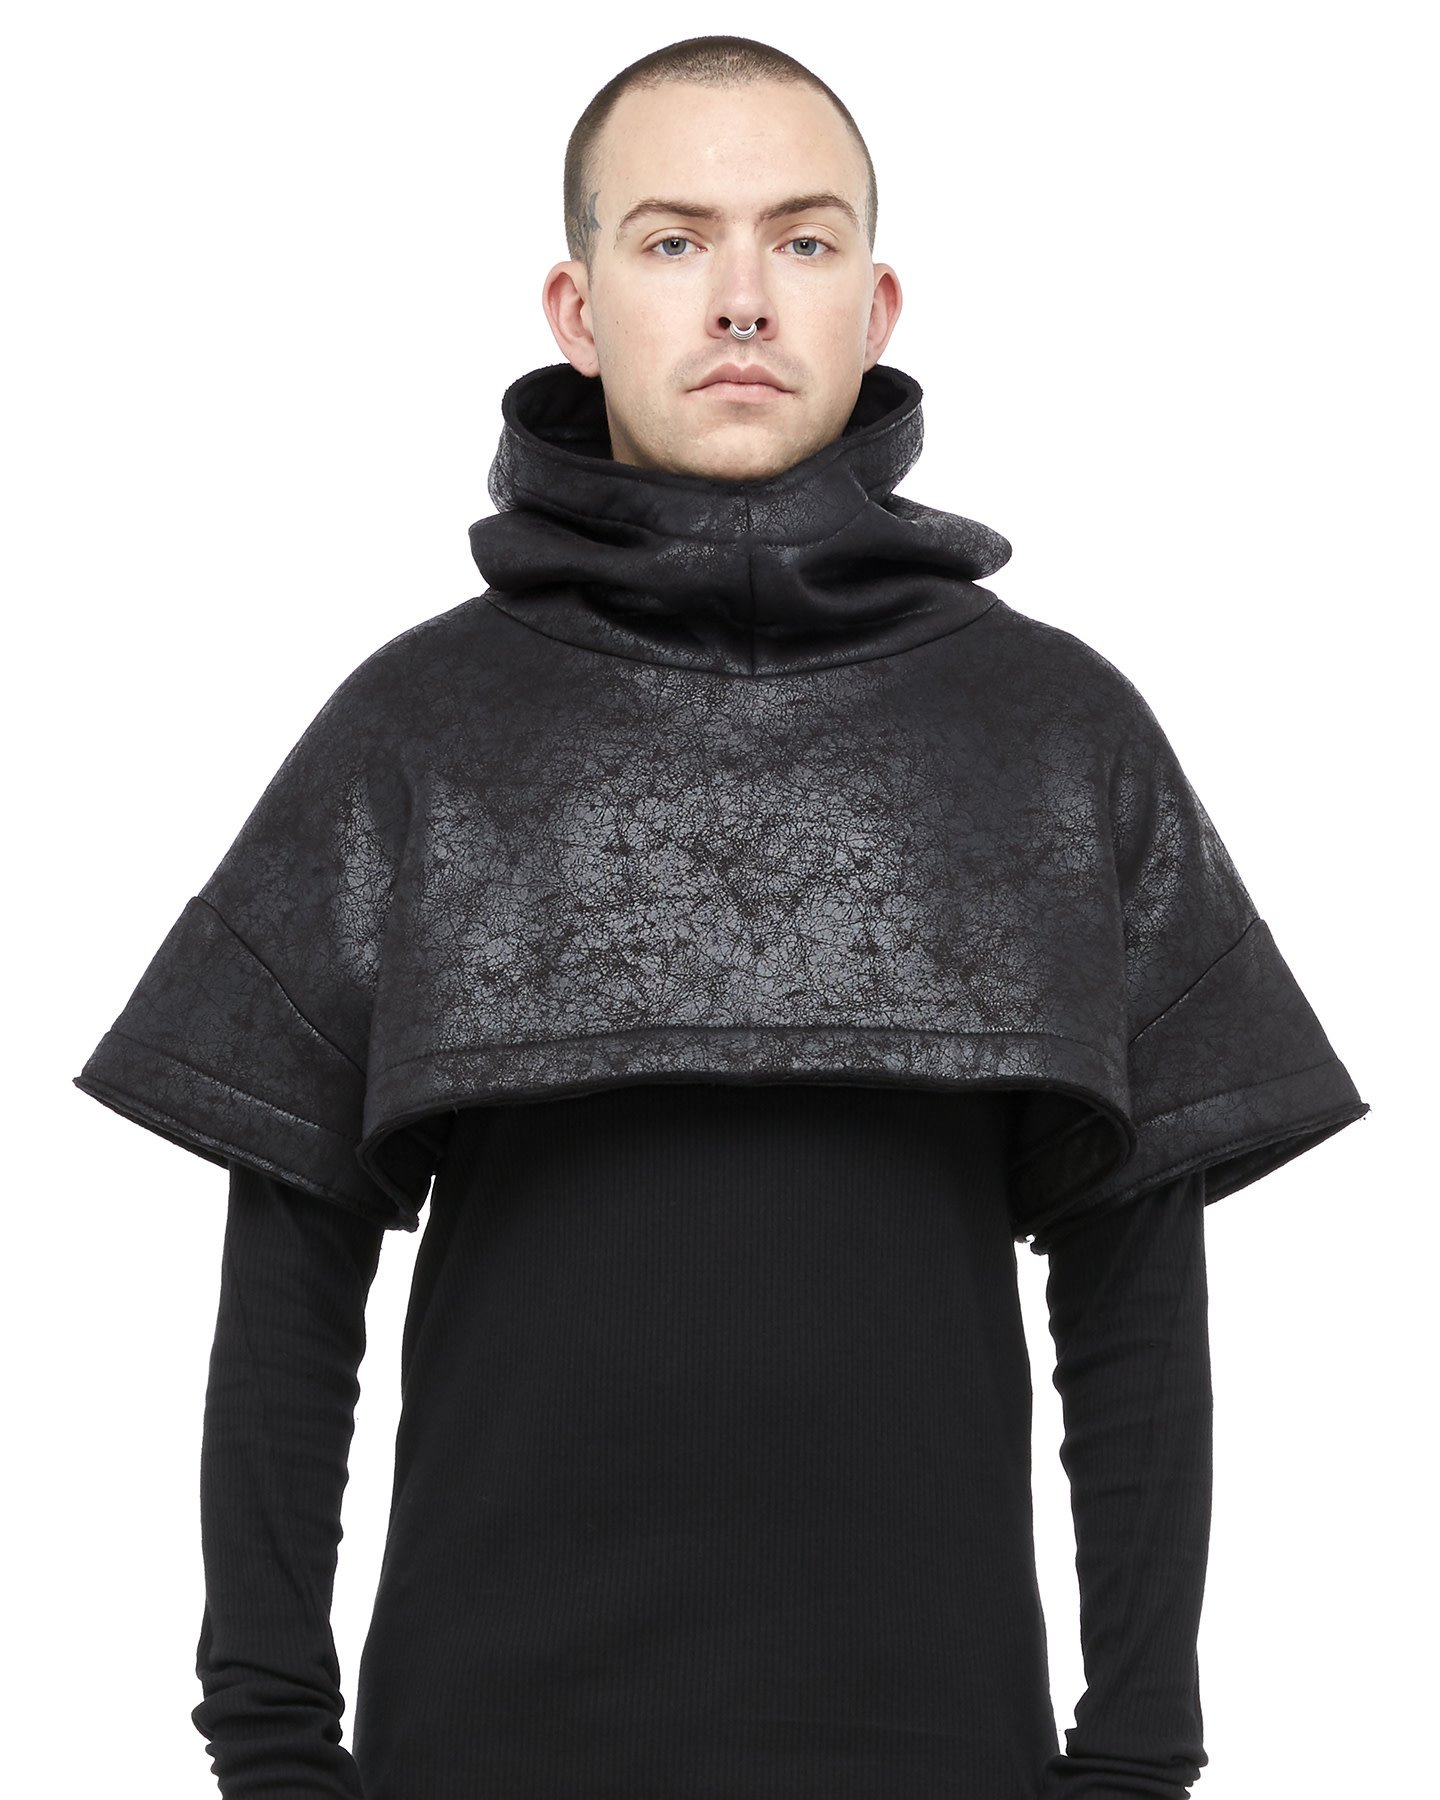 LEATHER EFFECT HOODED CROP TOP